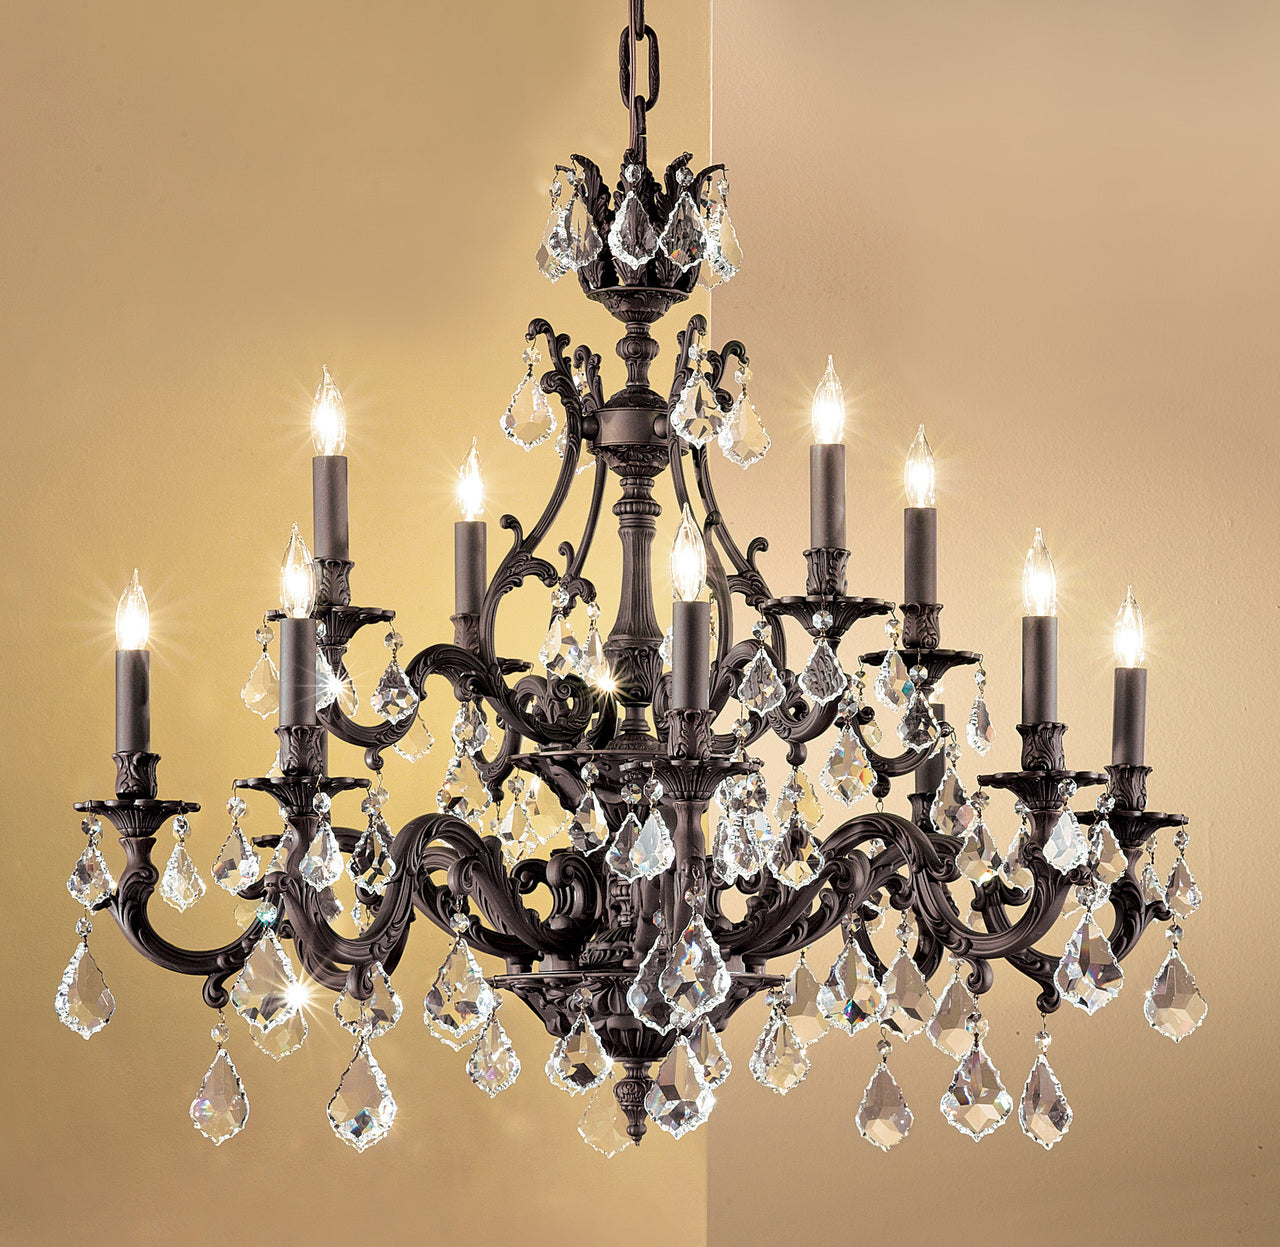 Classic Lighting 57349 AGP S Majestic Crystal Chandelier in Aged Pewter (Imported from Spain)